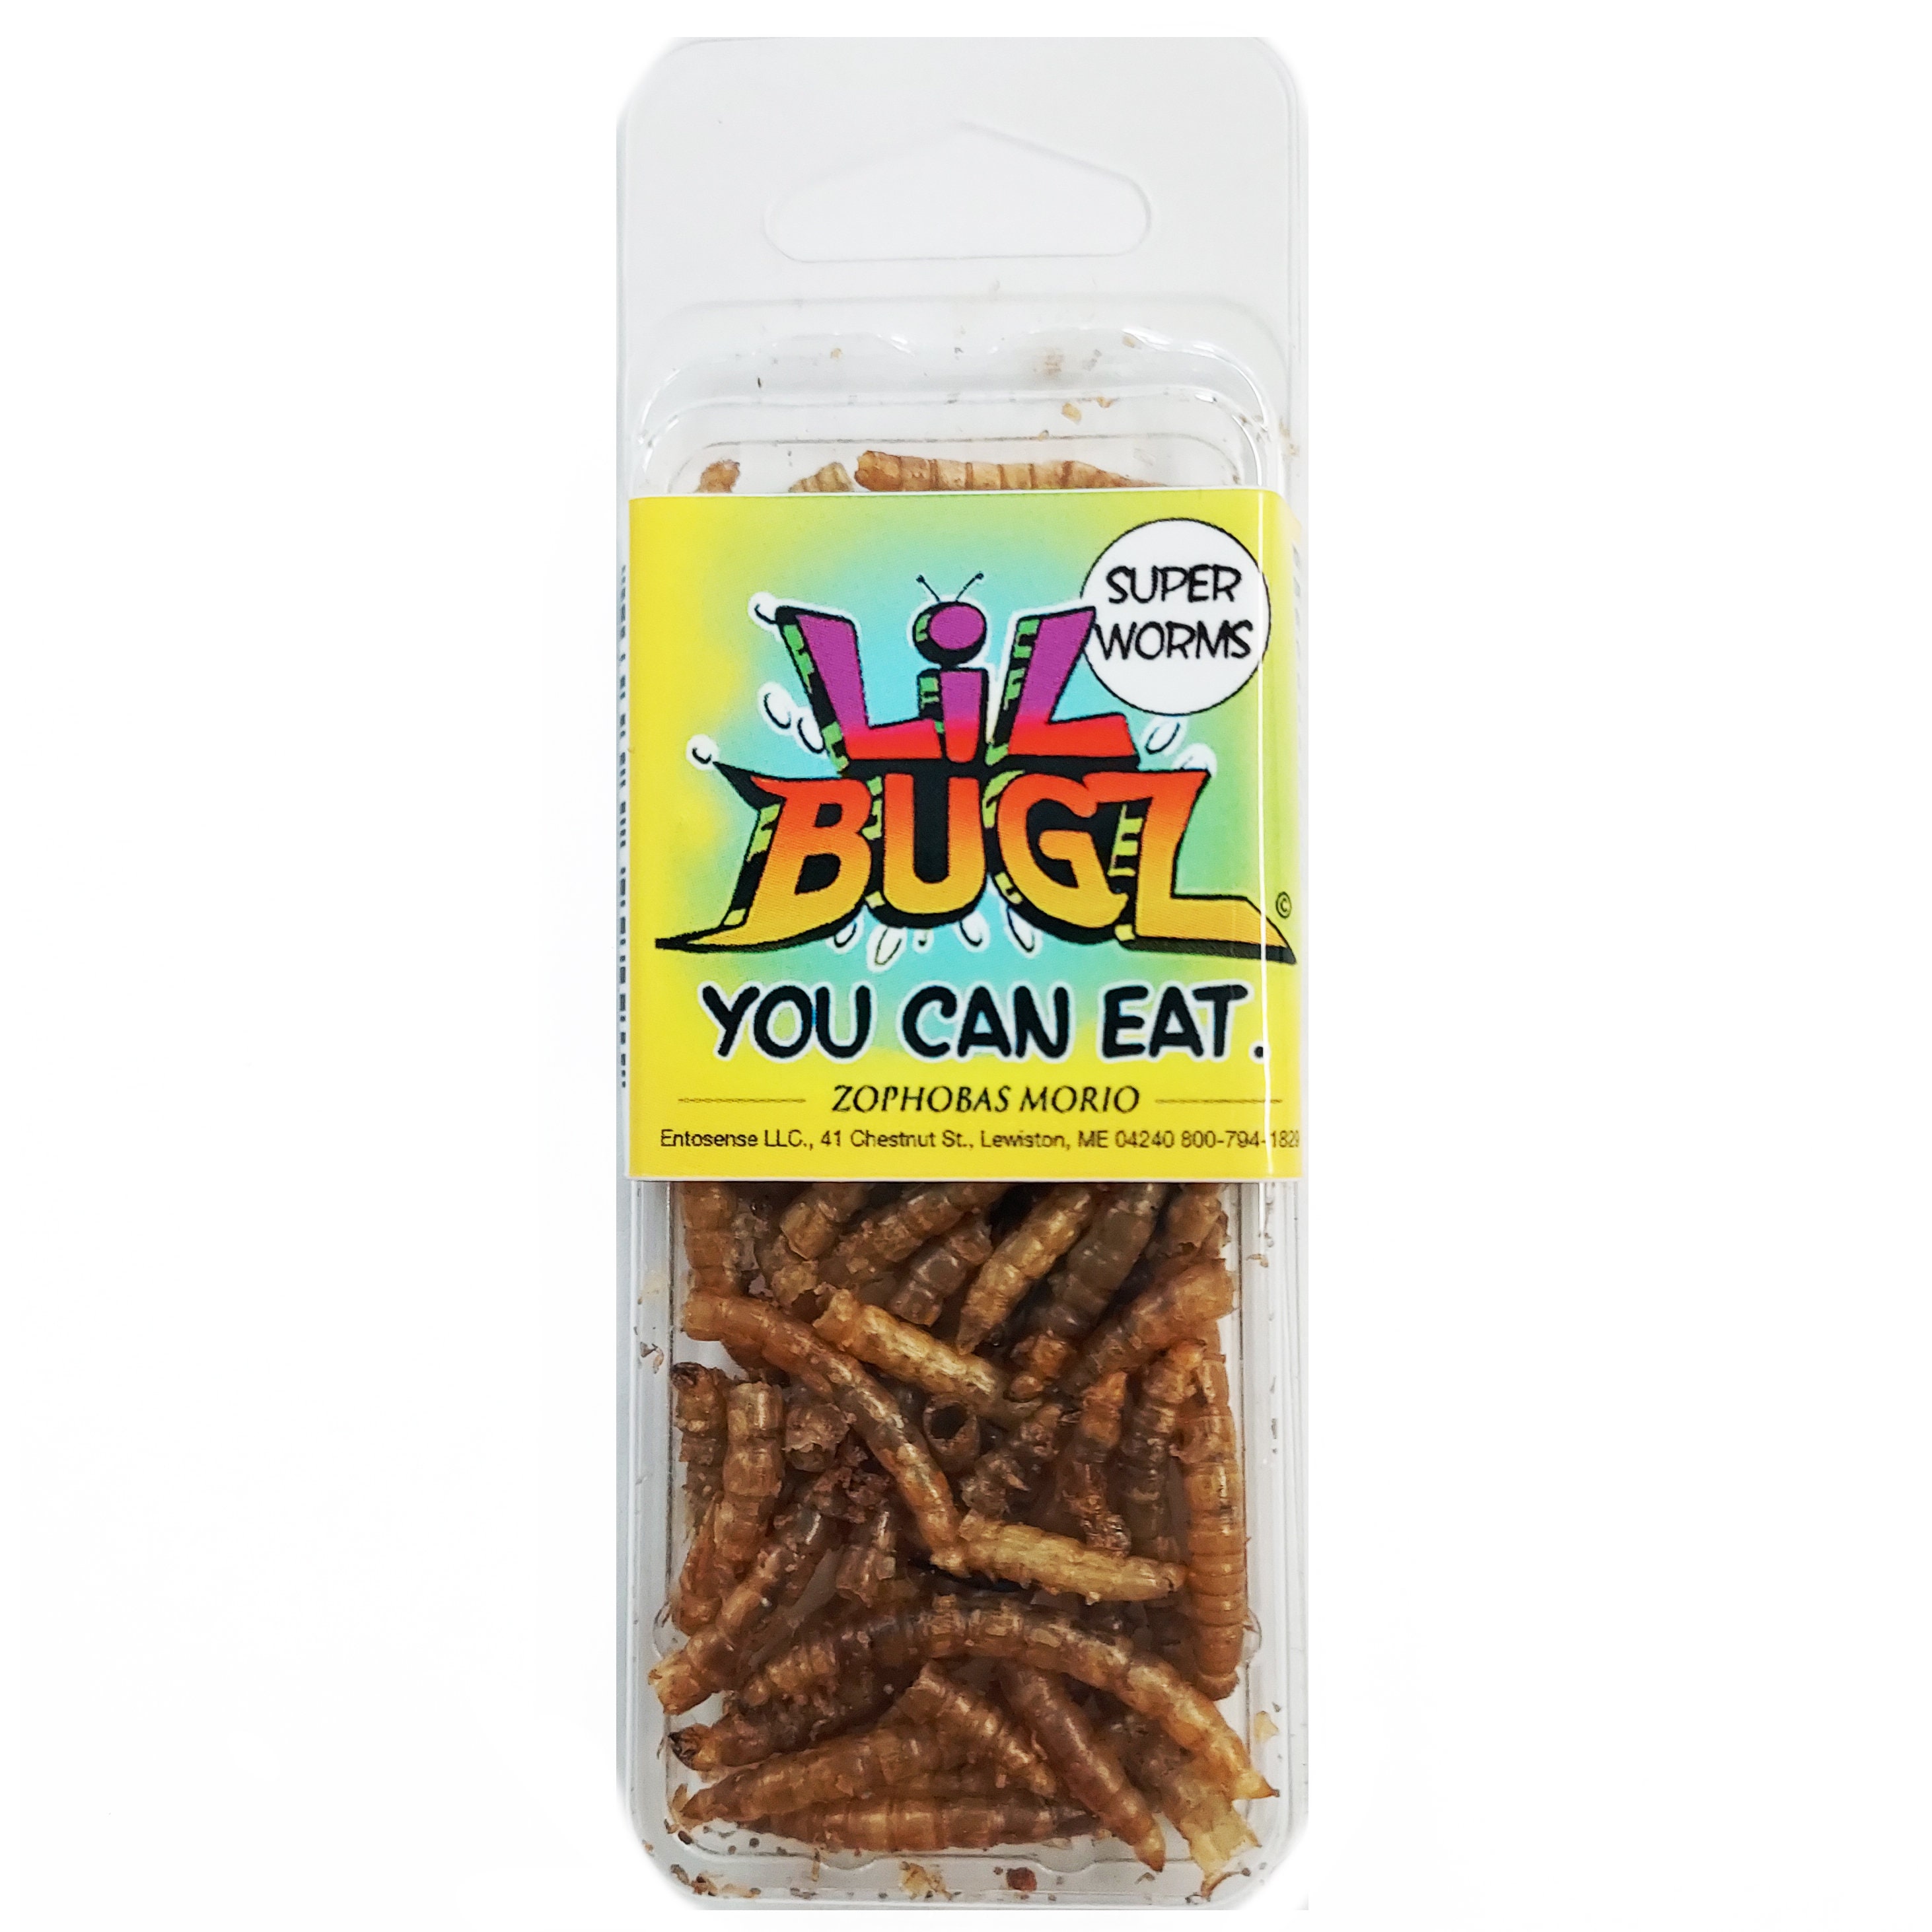 SUPER WORMS Lil Bugz Edible Insects Bred for Human Consumption -  Canada